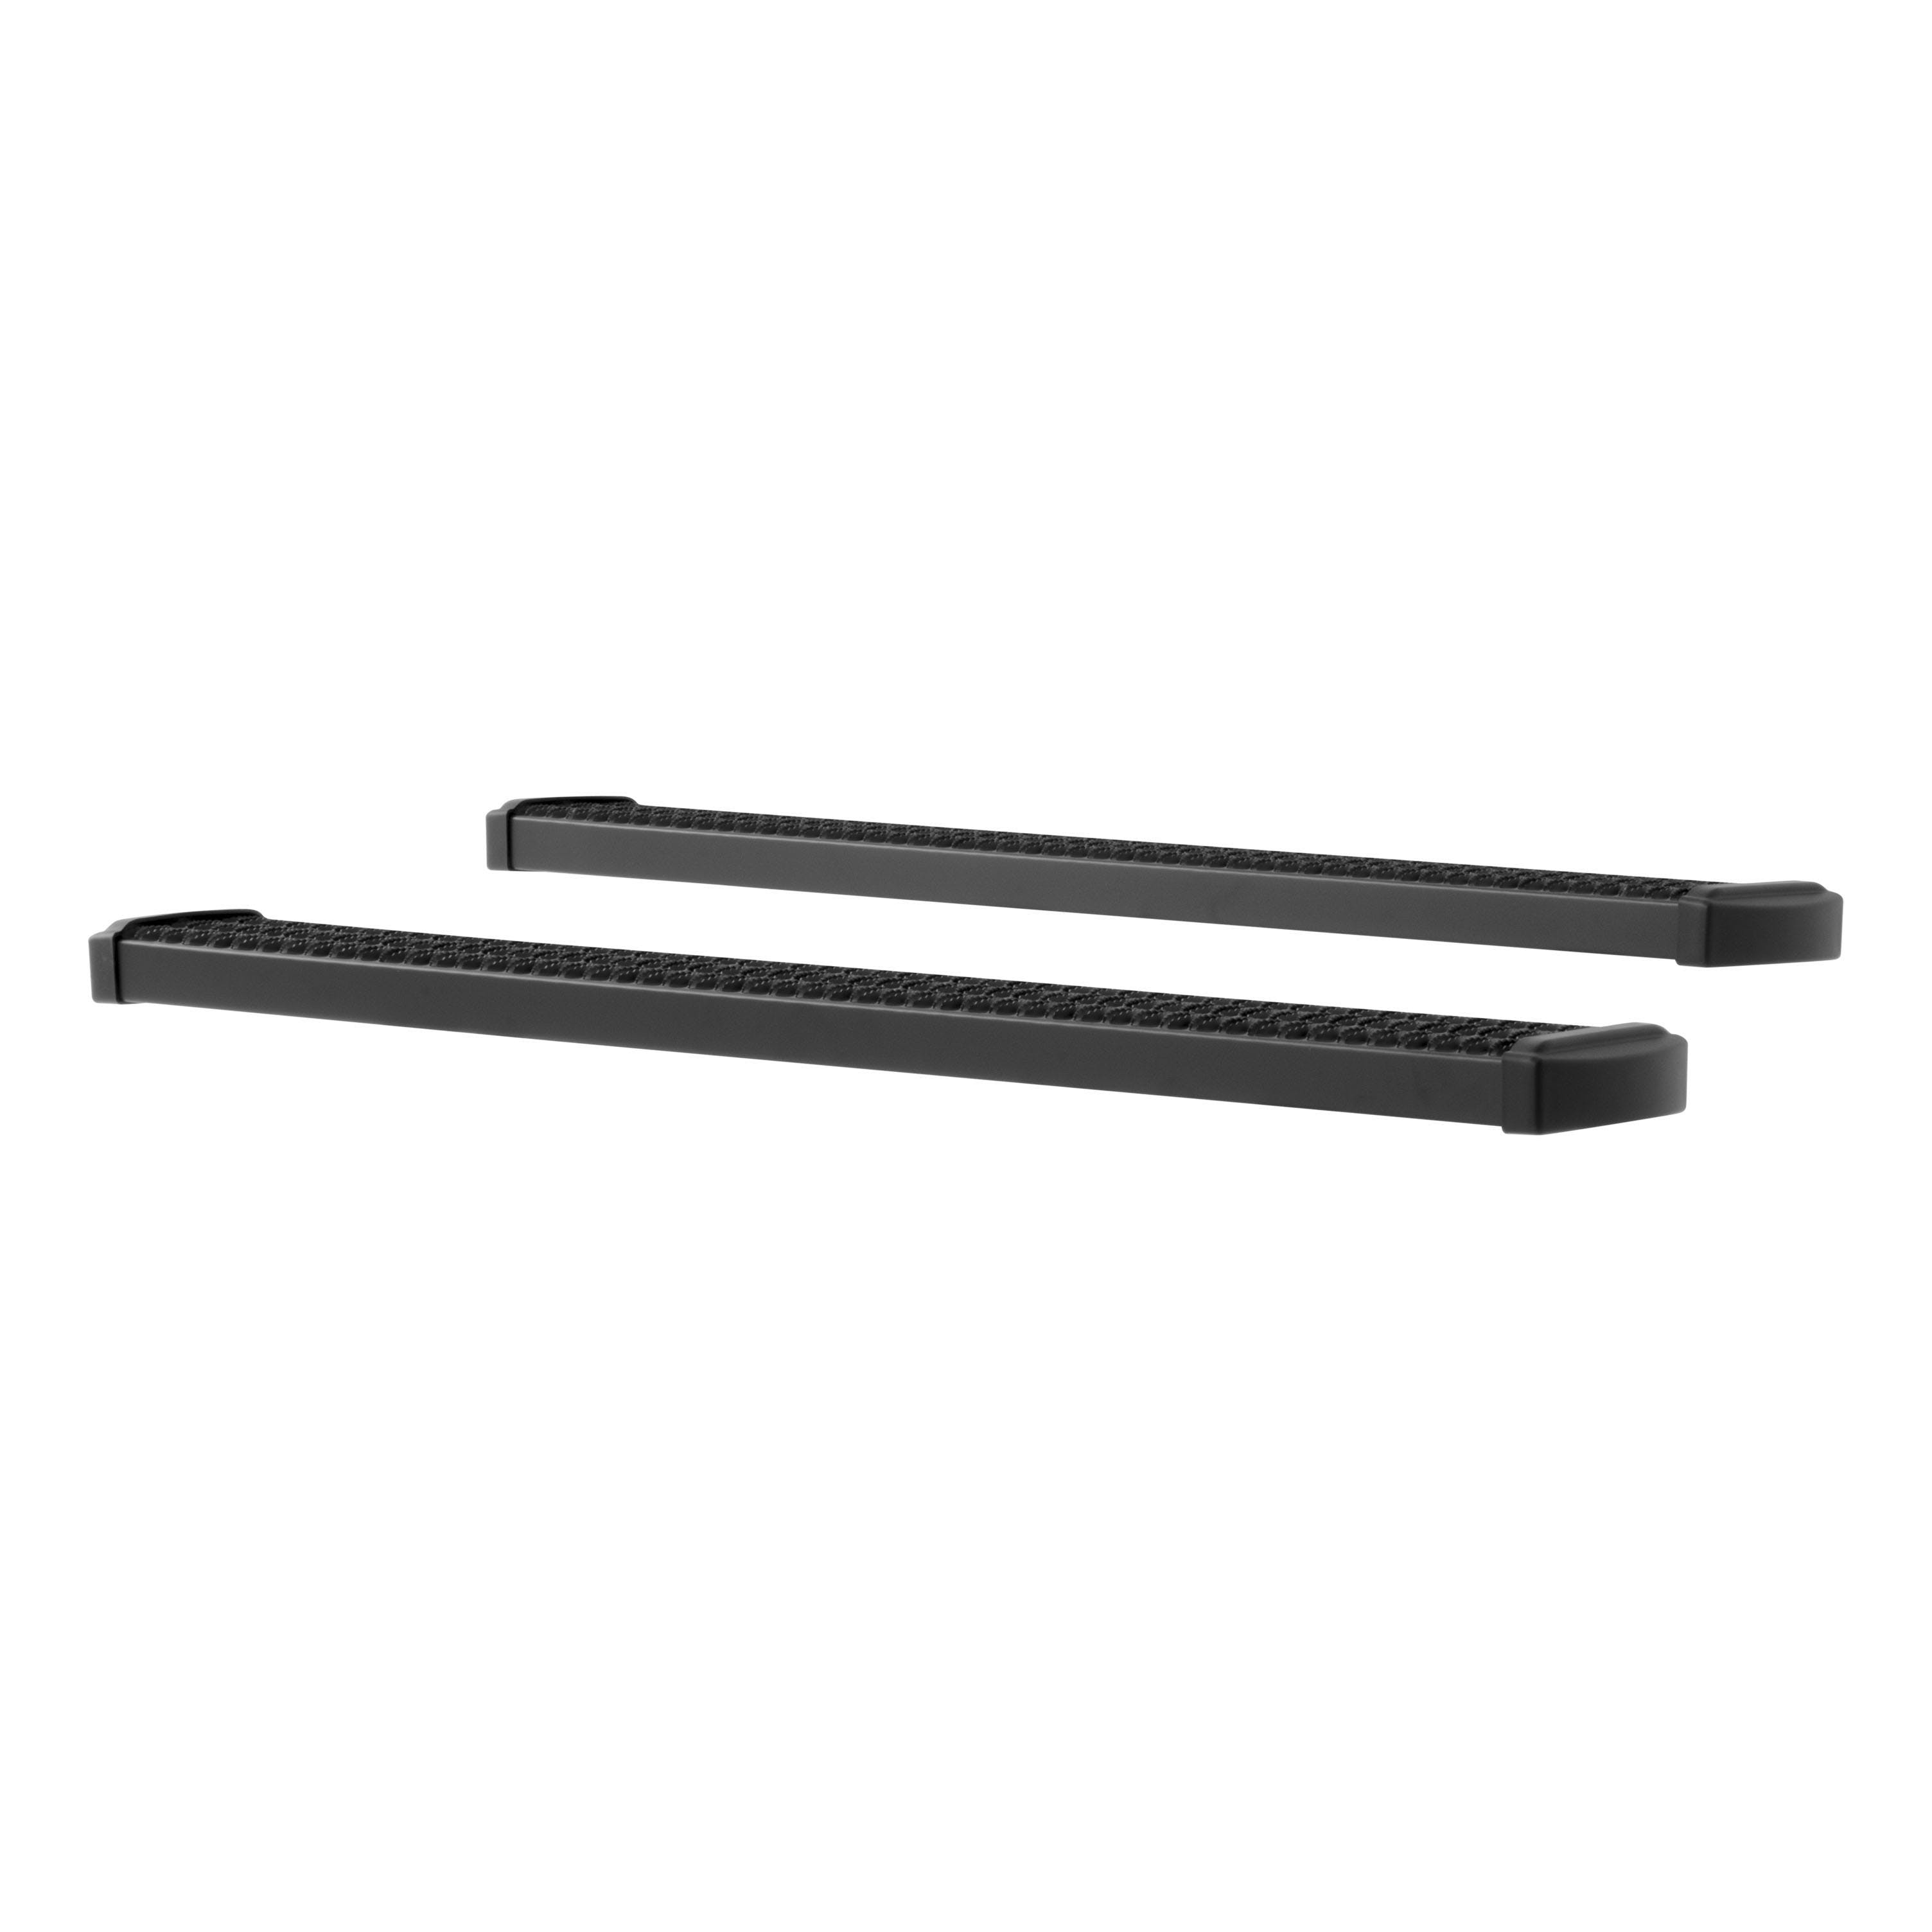 LUVERNE 415060-401721 Grip Step 7 inch Running Boards